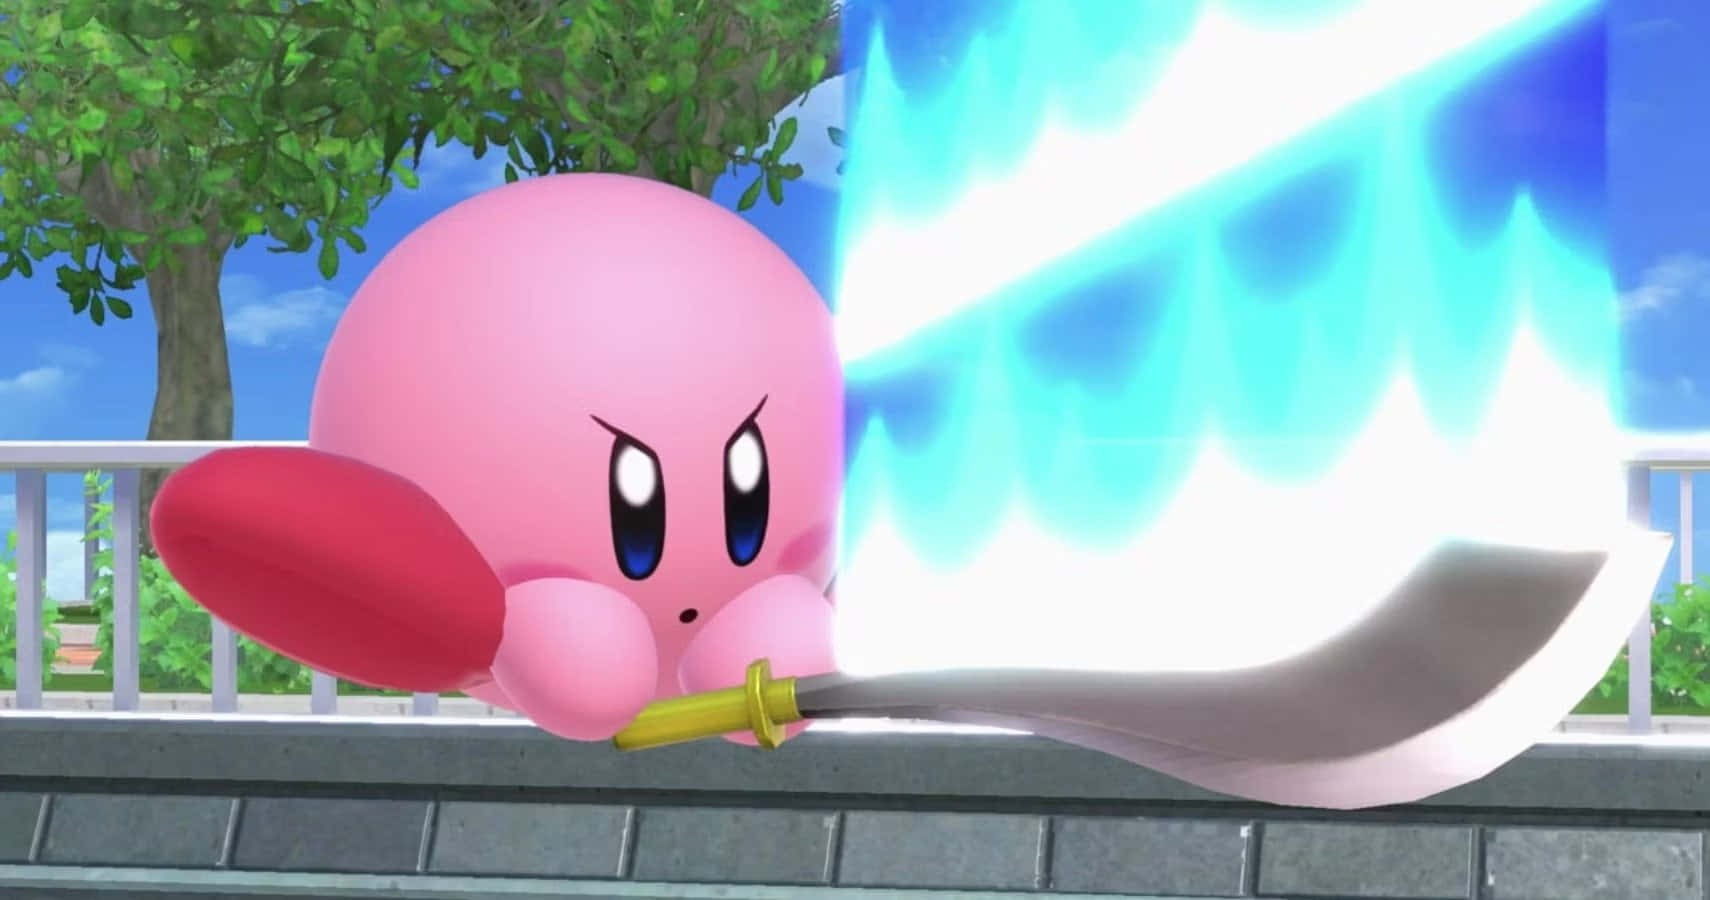 An energy-filled Kirby enjoying its adventures in Dream Land